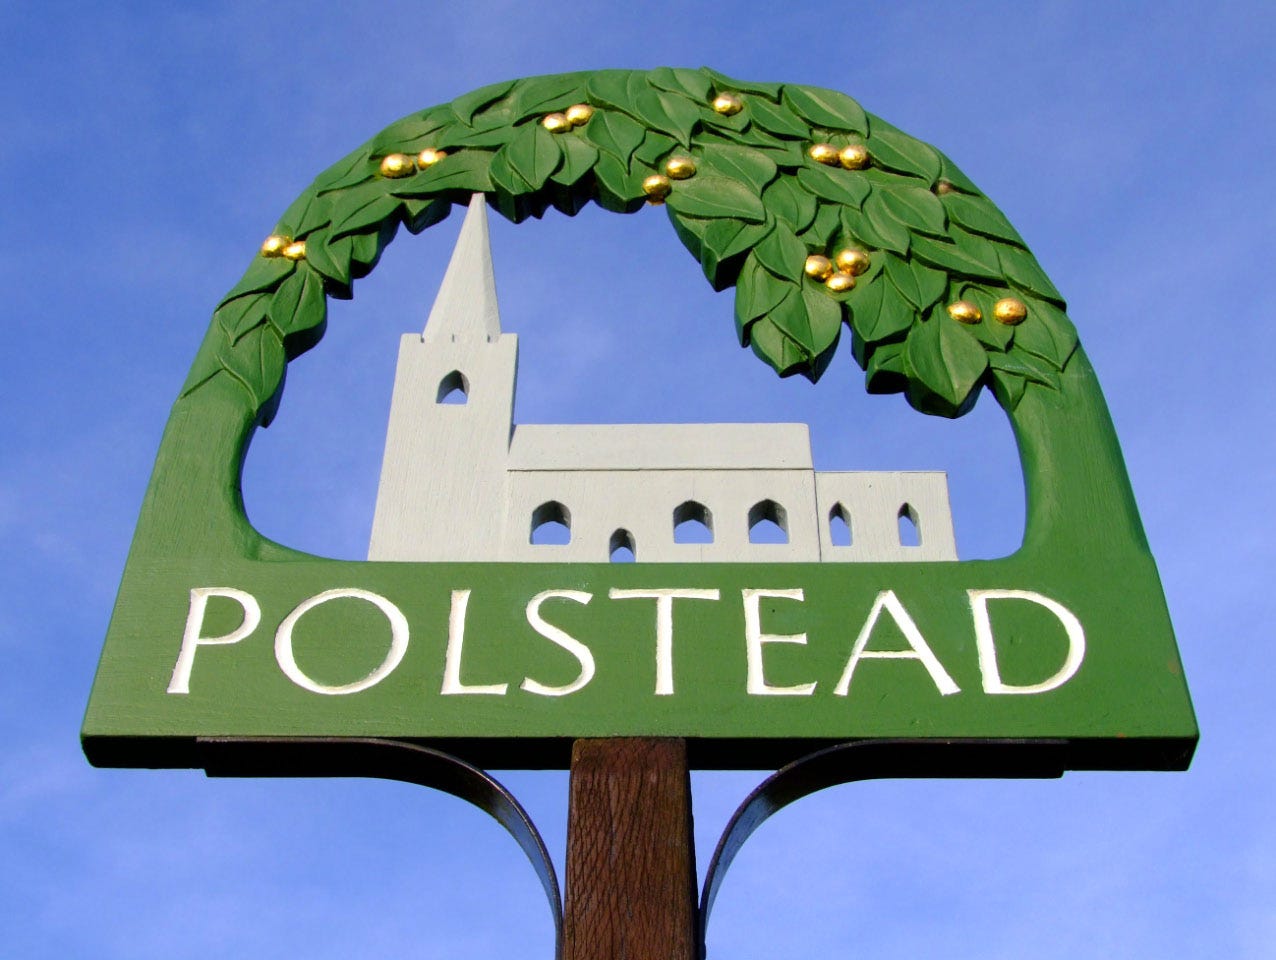 Image of the Polstead village sign set against a blue sky